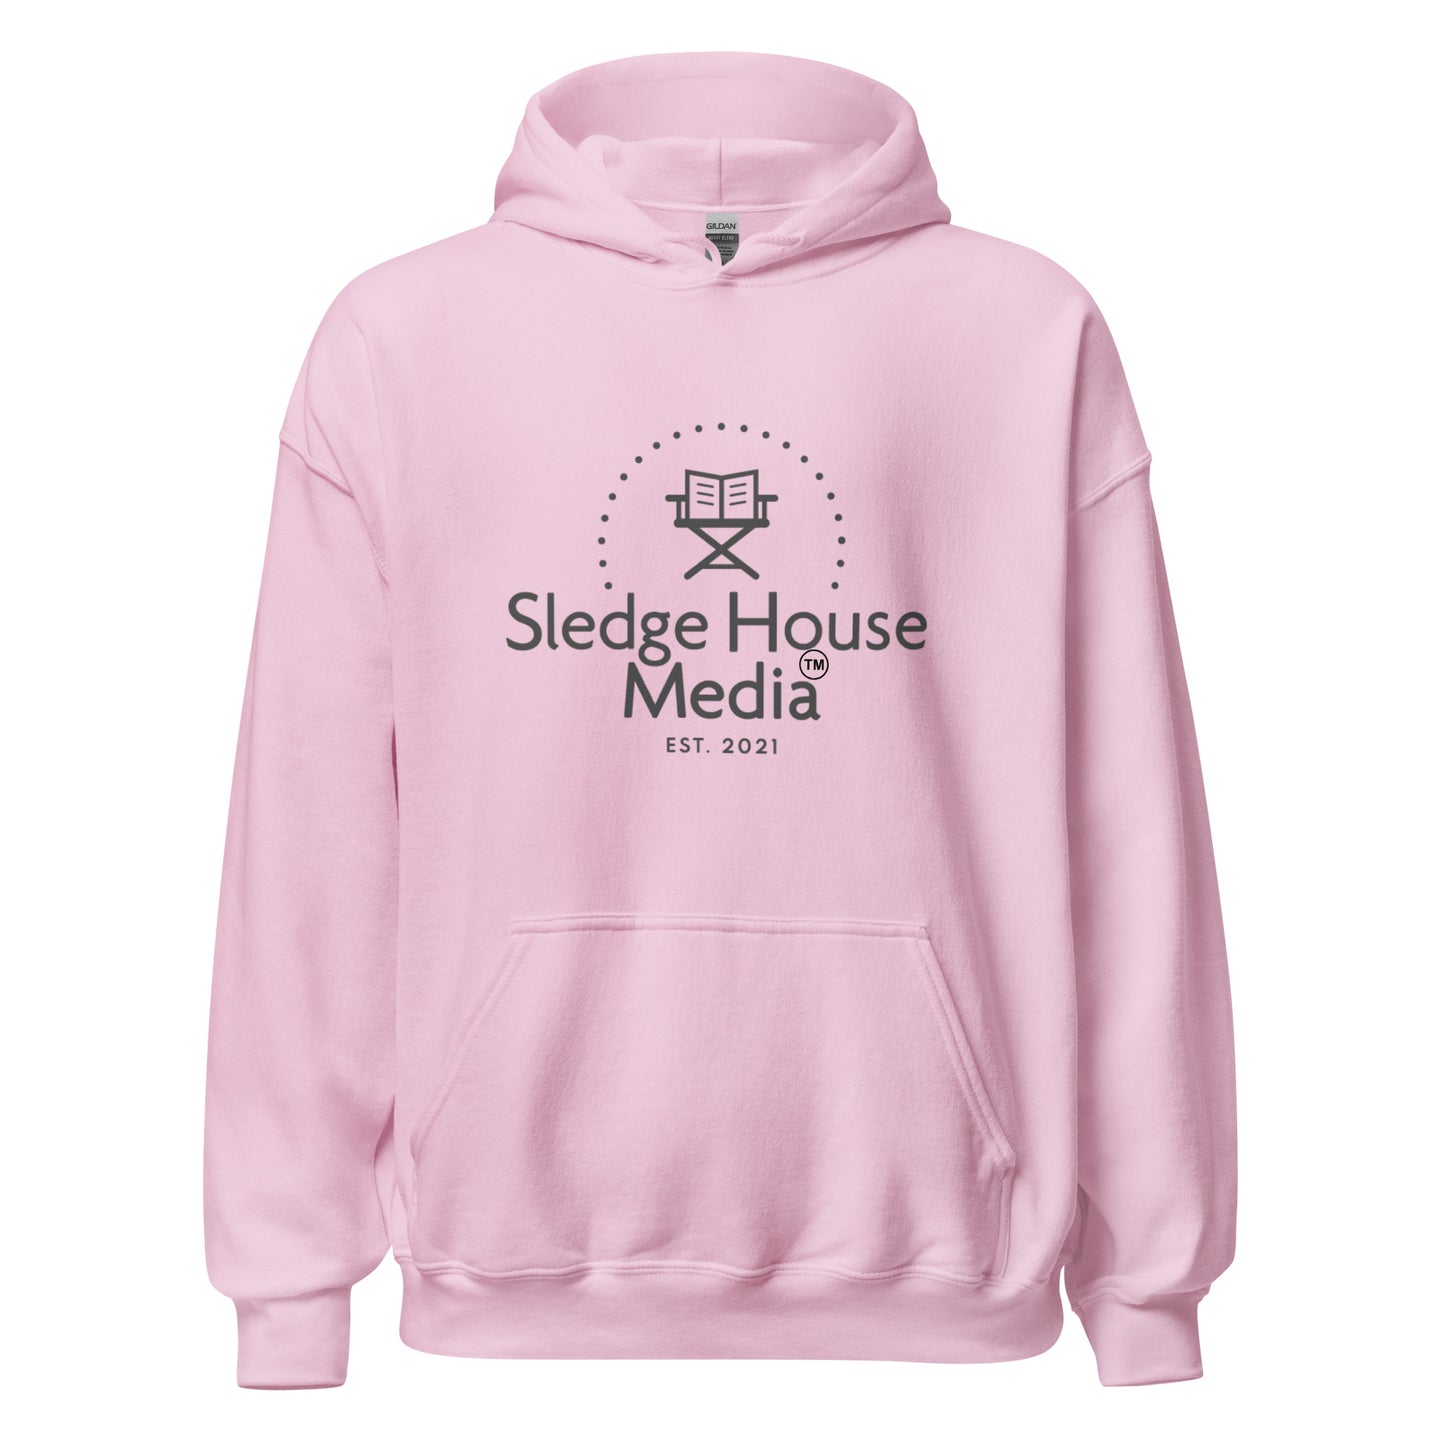 "The OG" Sledge House Media Every Day White or Pink Cozy Unisex Hoodie